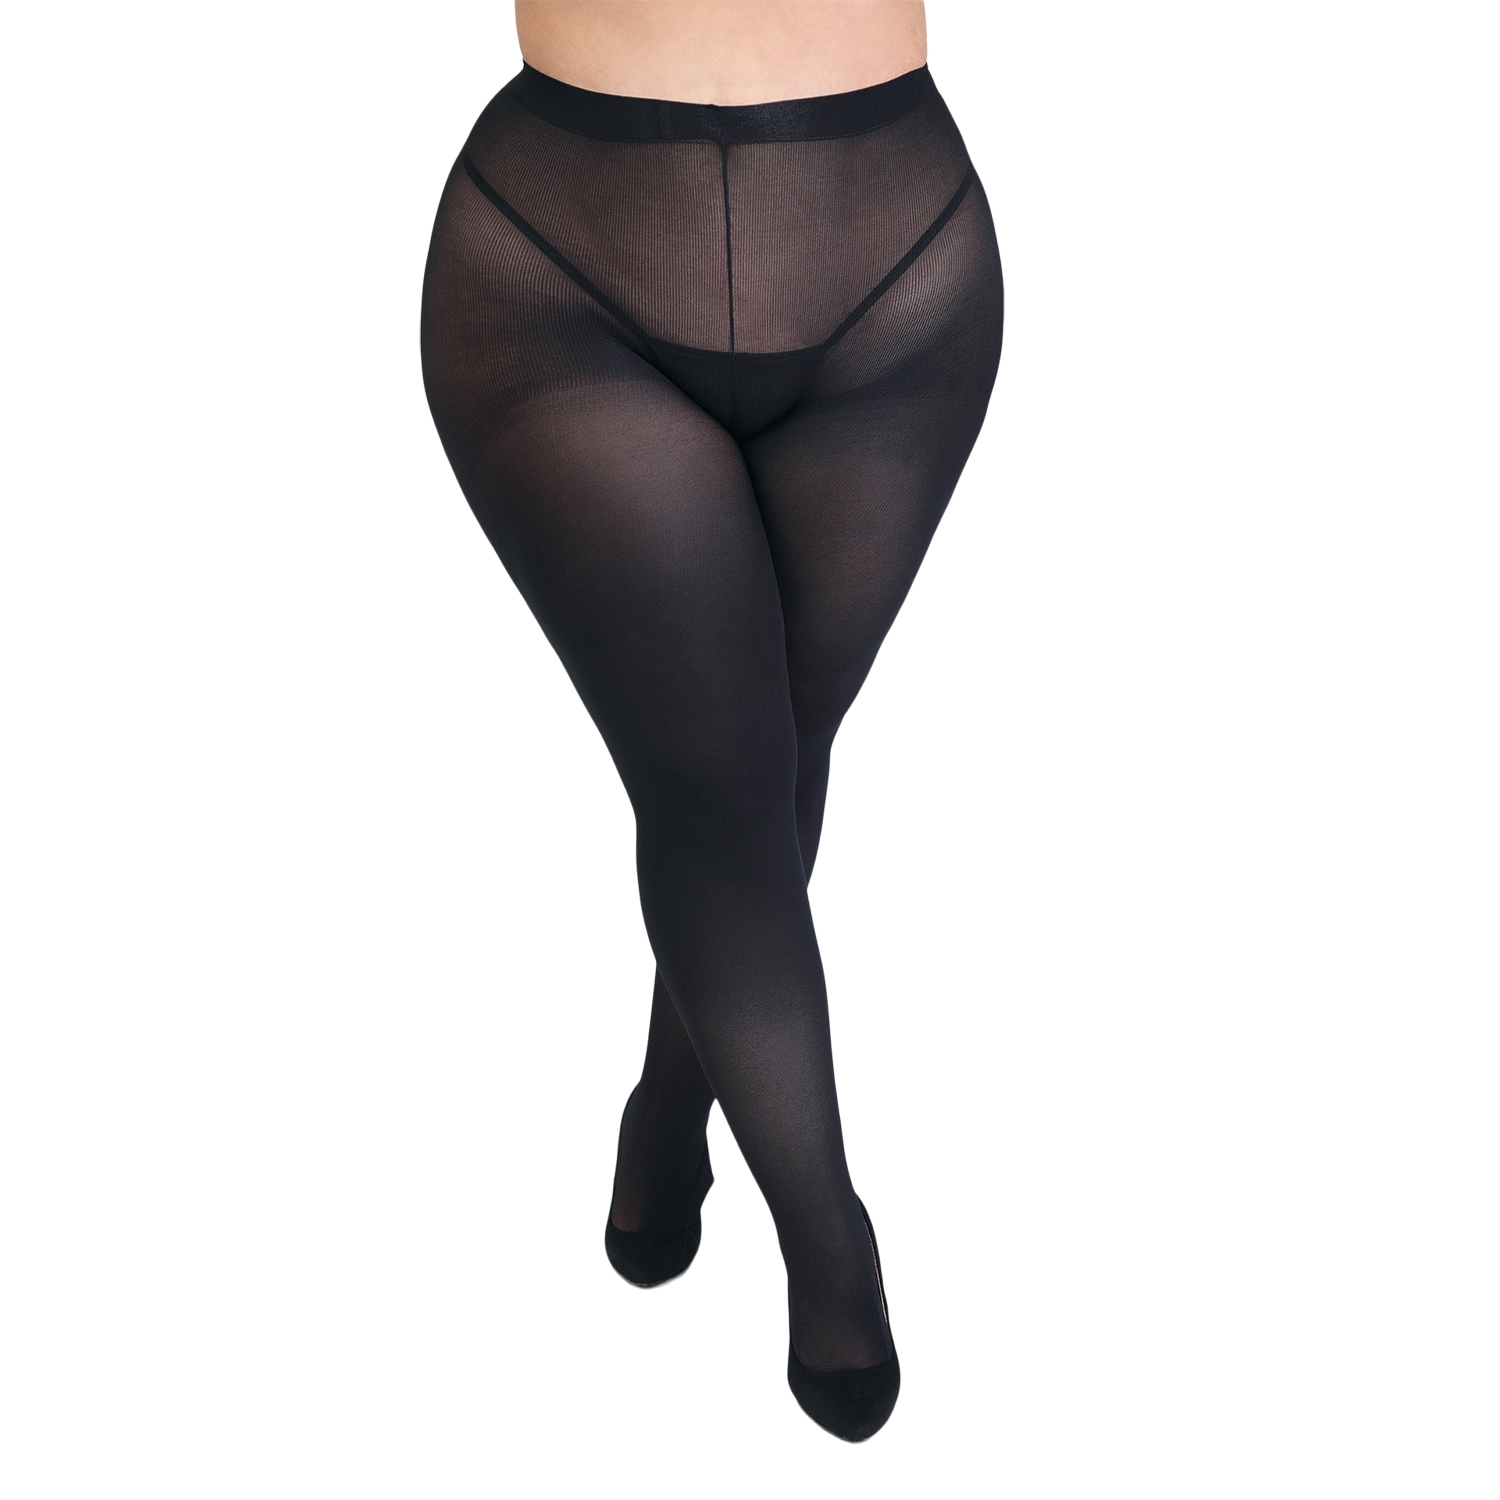 Fifty Shades of Grey Captivate Plus Size Spanking Tights     - Sort - One Size Queen